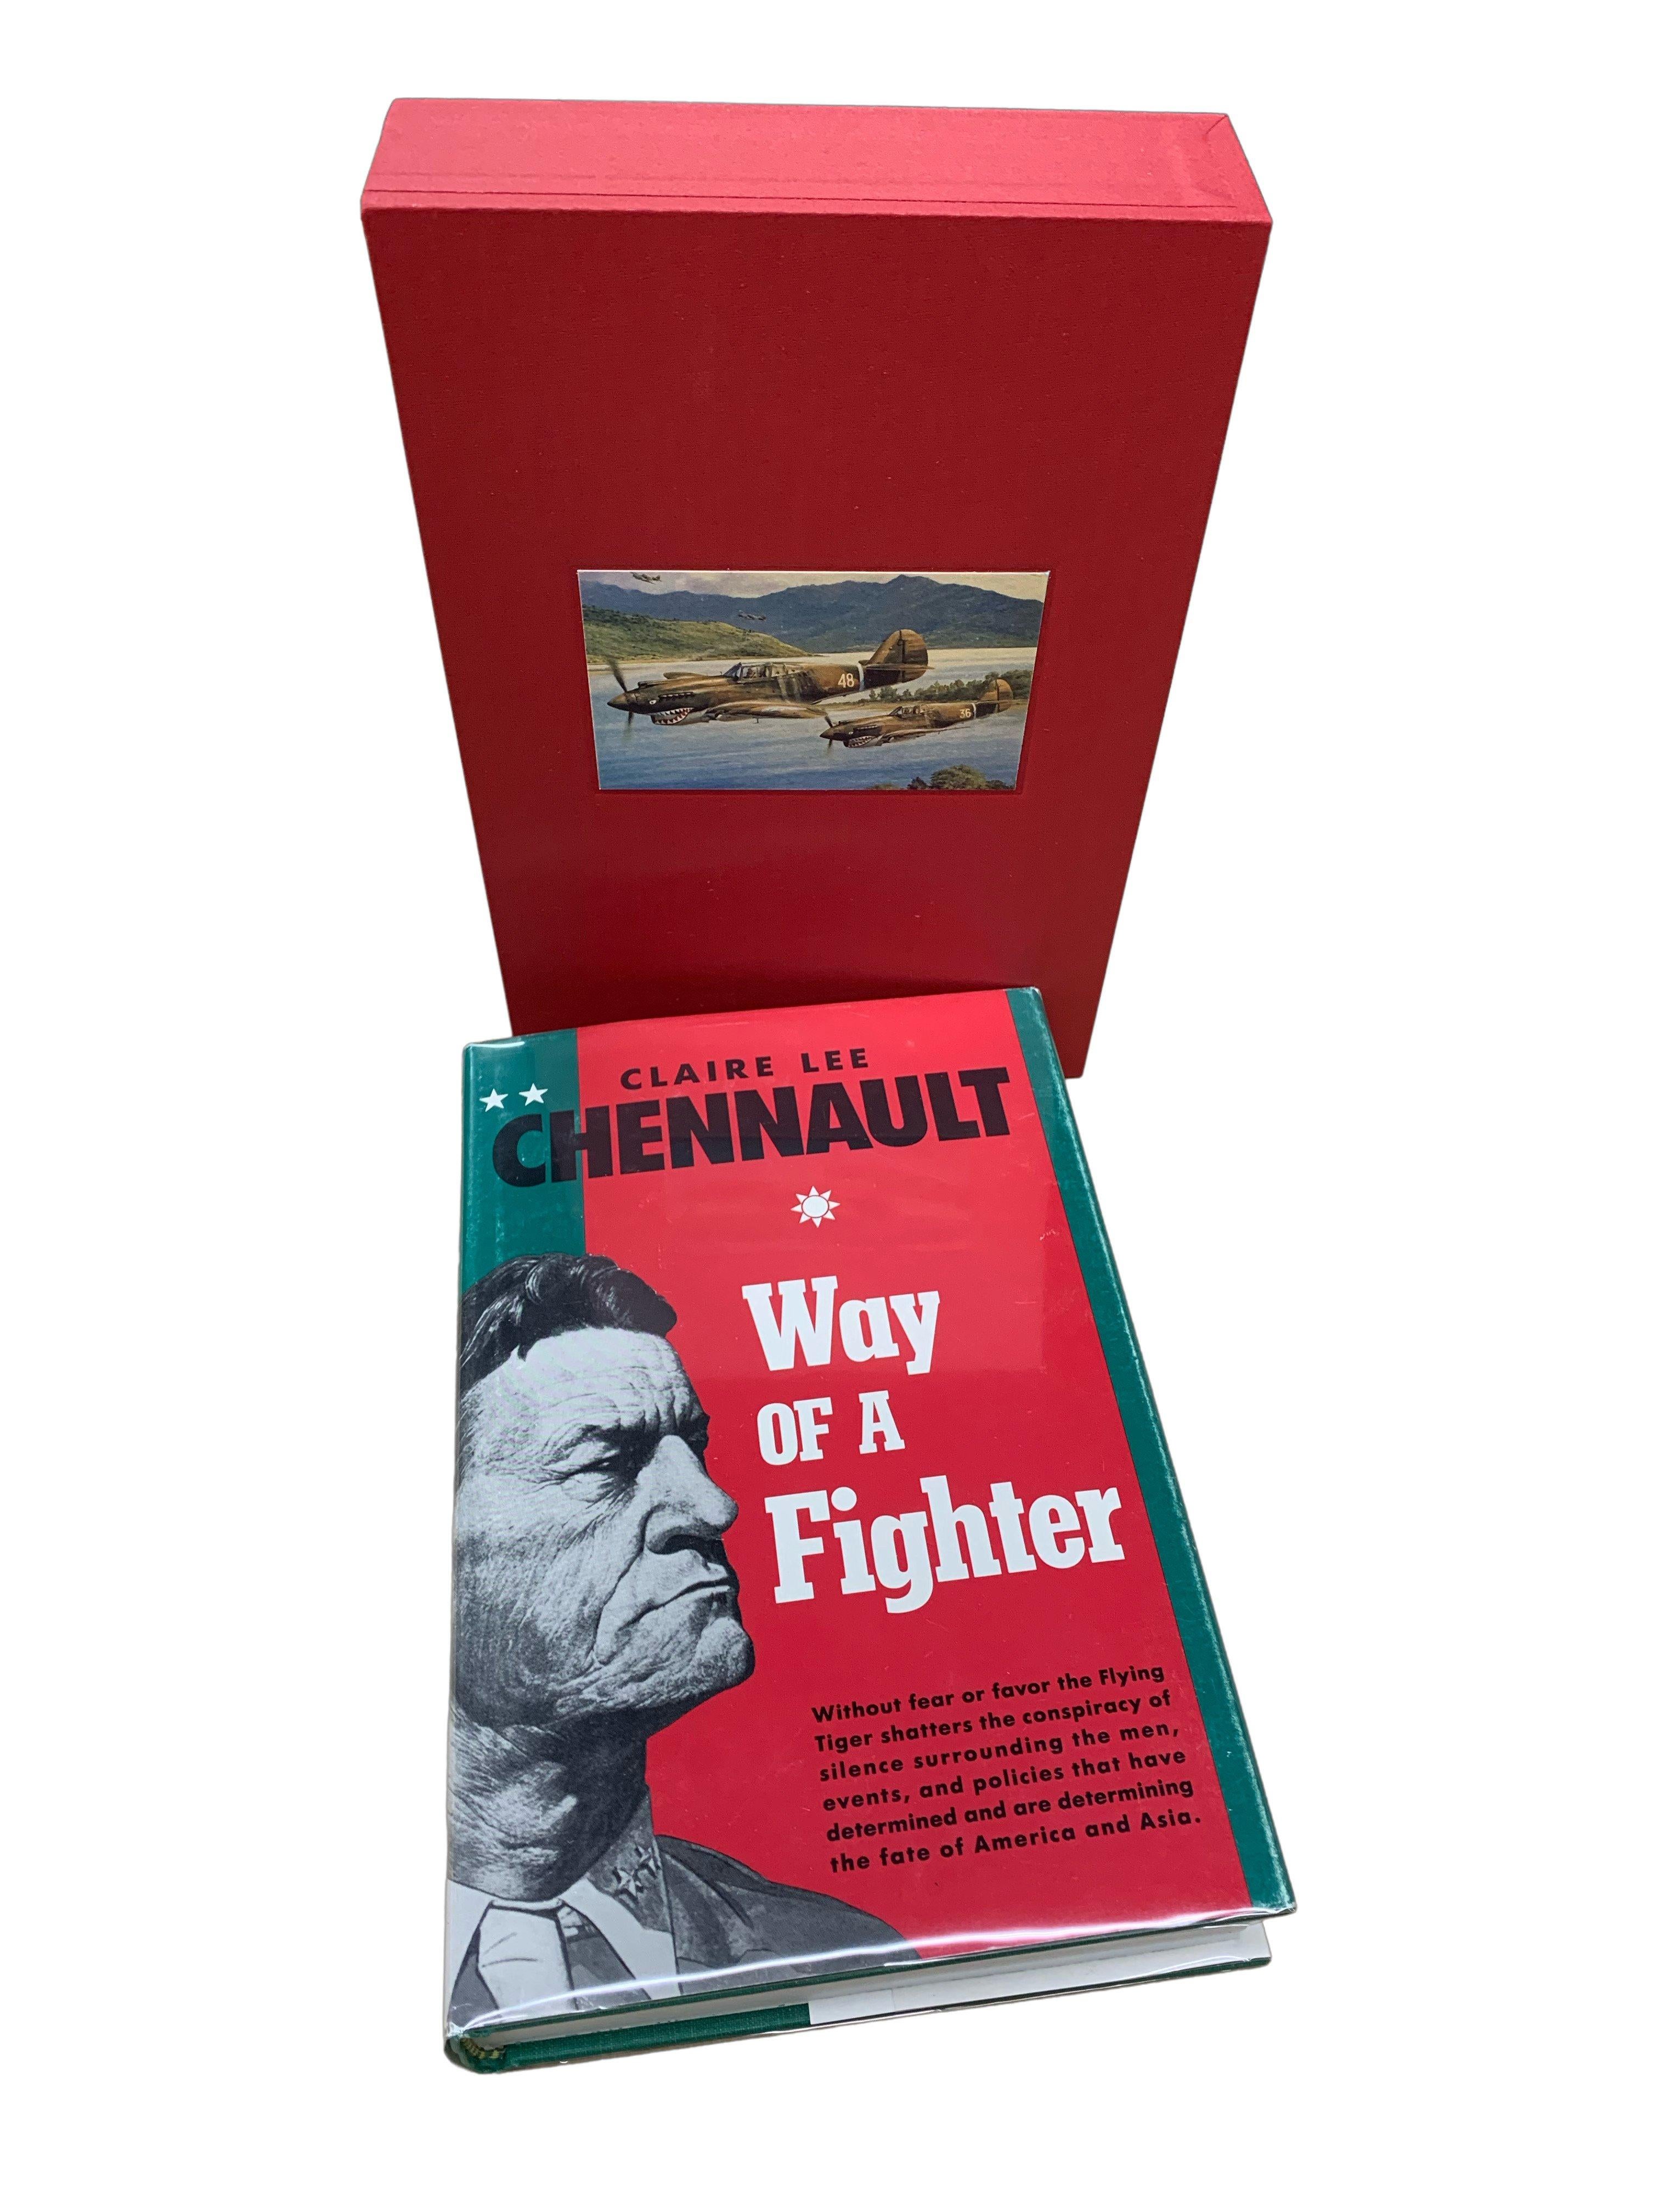 Chennault, Claire Lee. Way of a Fighter. Tucson, Arizona: James Thorvardson & Sons, 1991. Limited edition. Signed by fifteen members of the Flying Tigers squadron. Original dust jacket.

Presented is a limited edition printing of Claire Lee